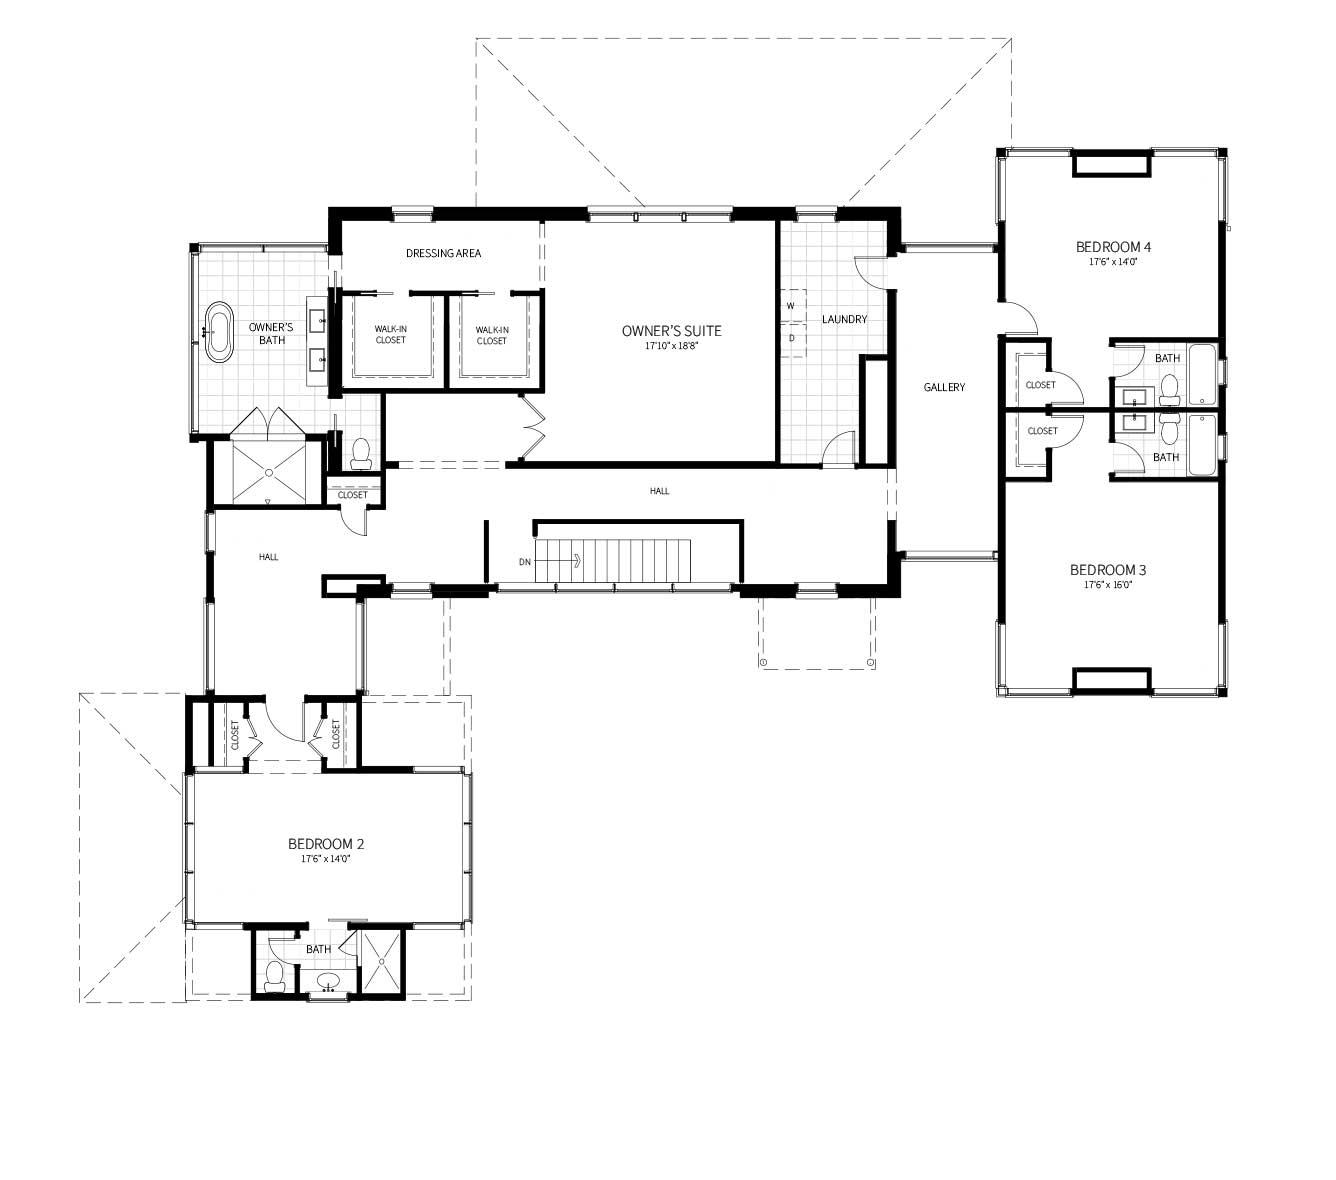 The upper level of the home proposed for 11520 Luvie Ct, including an exansive owner's suite and three additional bedrooms.